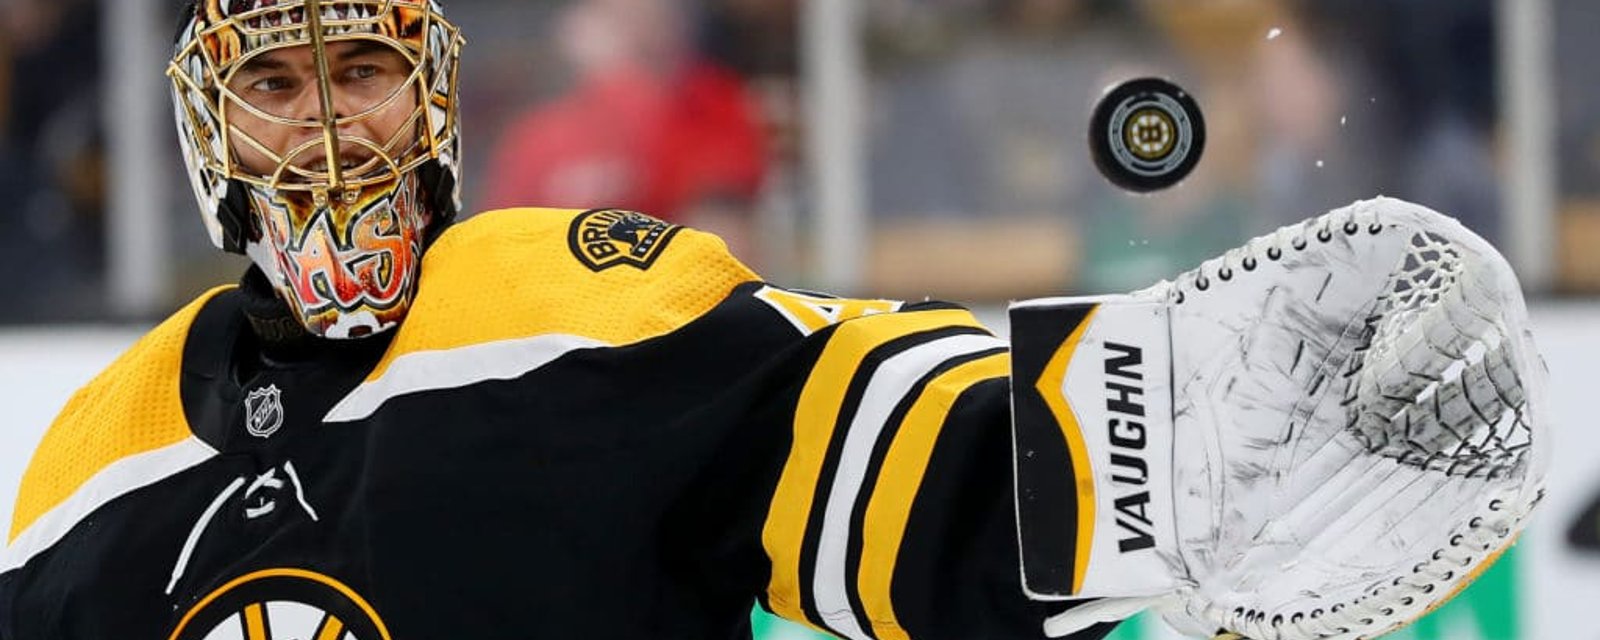 Fans blame Rask for Game 1 loss; Bruins refuse to throw him under the bus